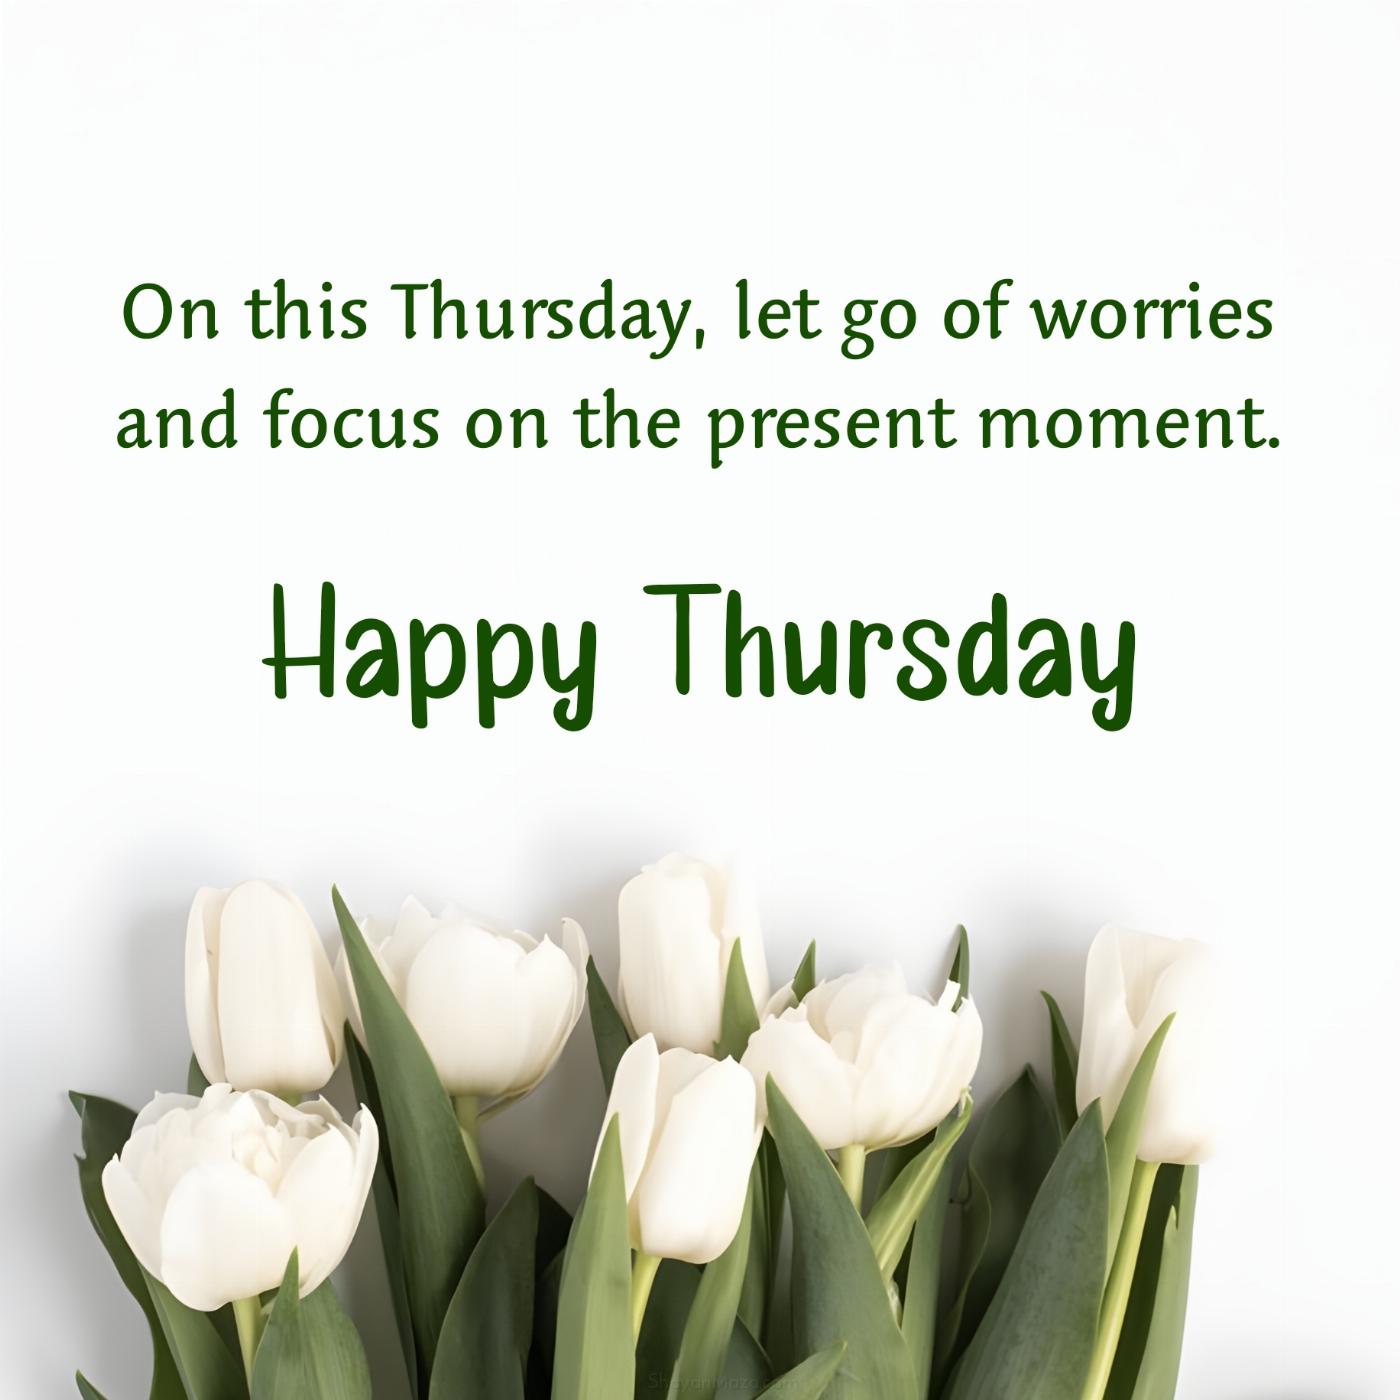 On this Thursday let go of worries and focus on the present